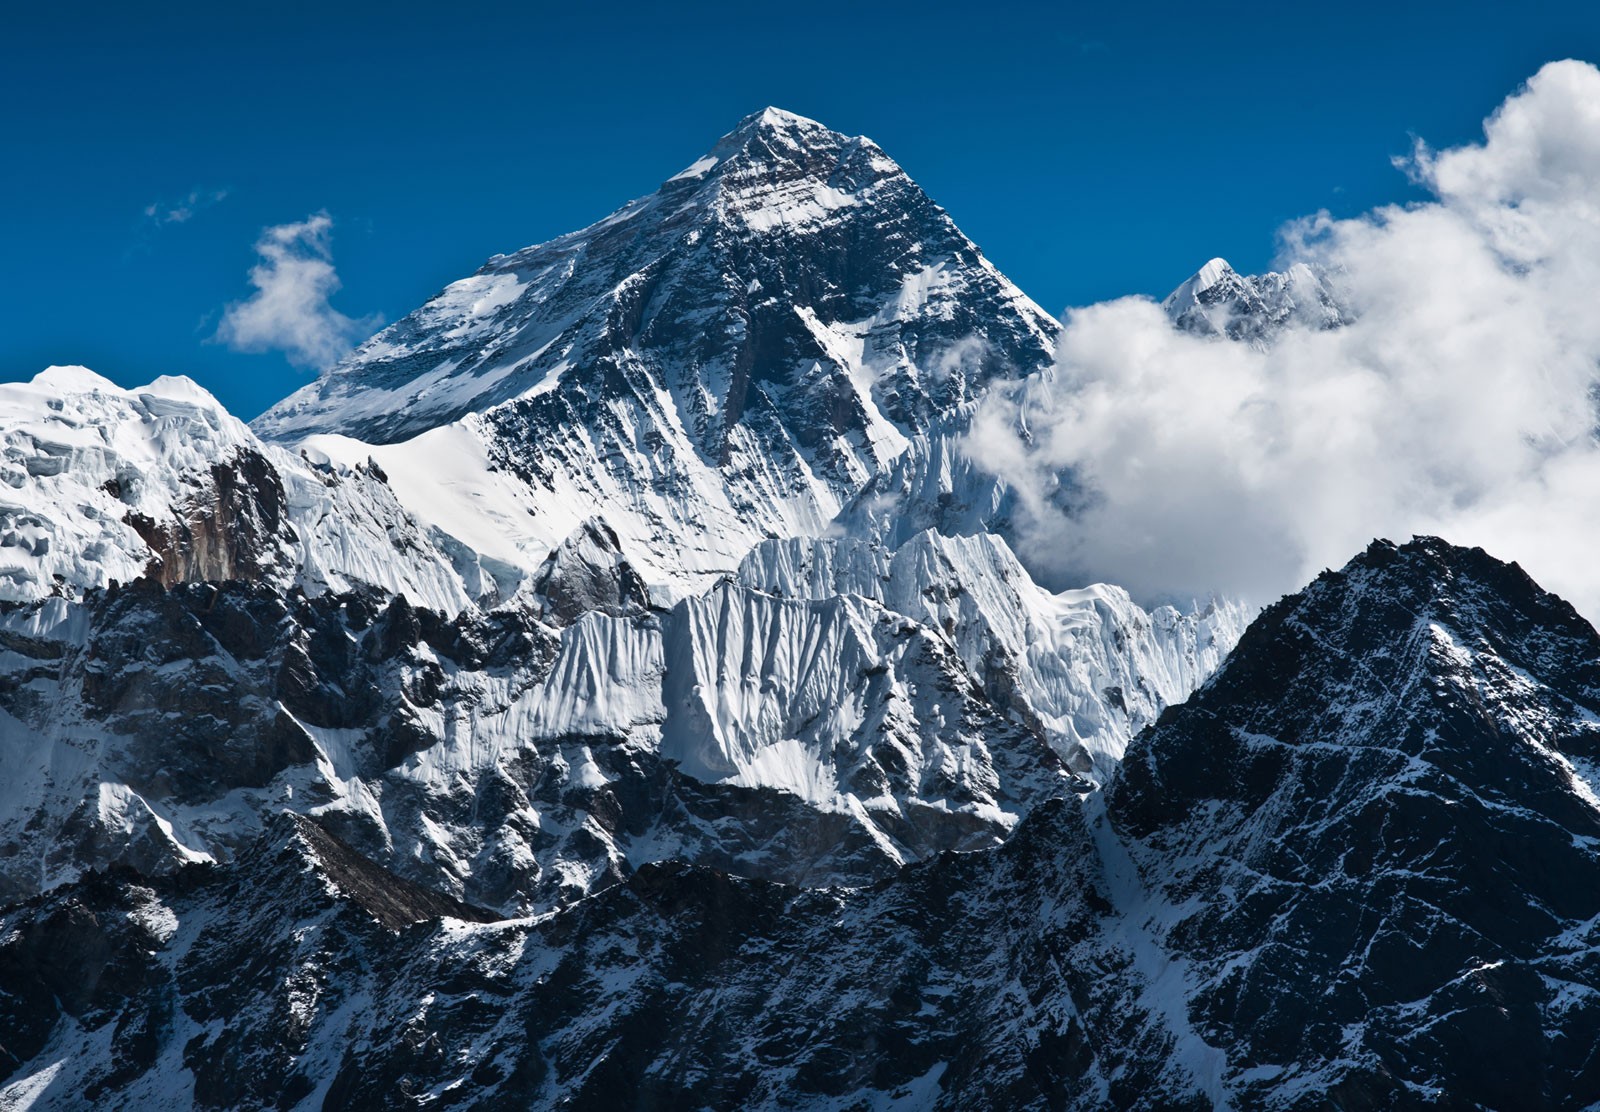 Around 80 climb Everest in a day